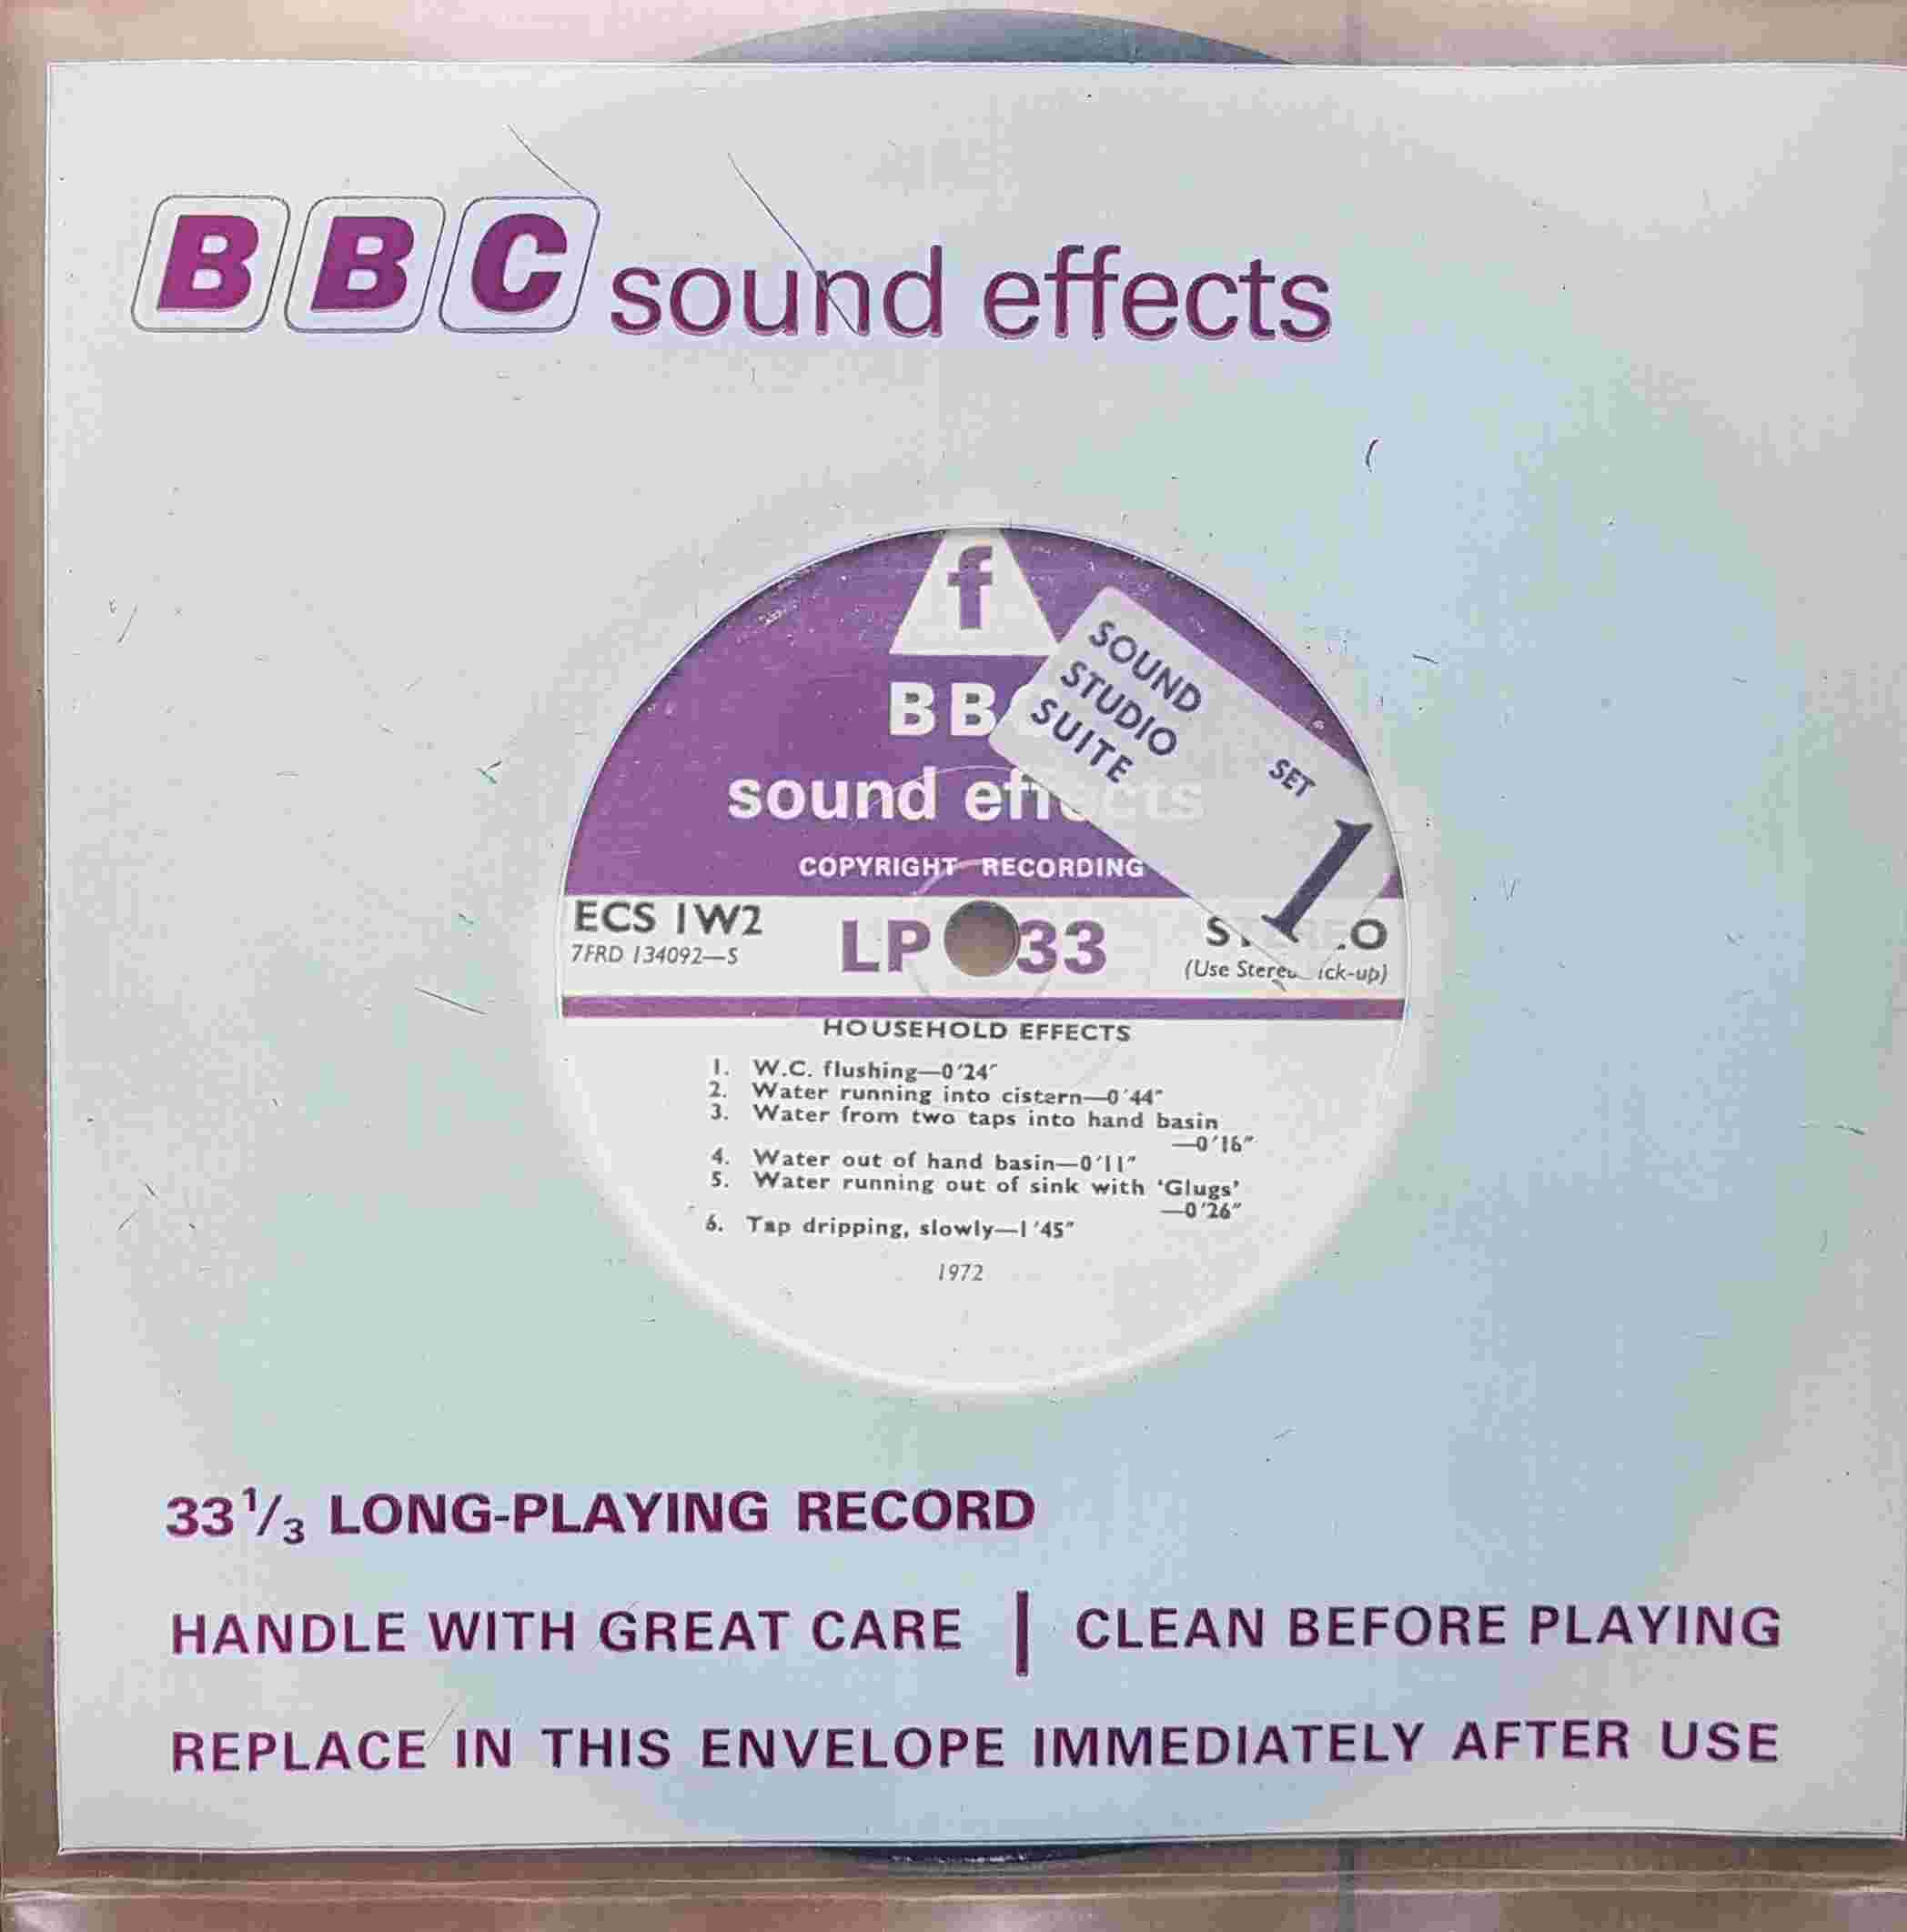 Picture of ECS 1W2 Household effects / Large fountain by artist Not registered from the BBC singles - Records and Tapes library